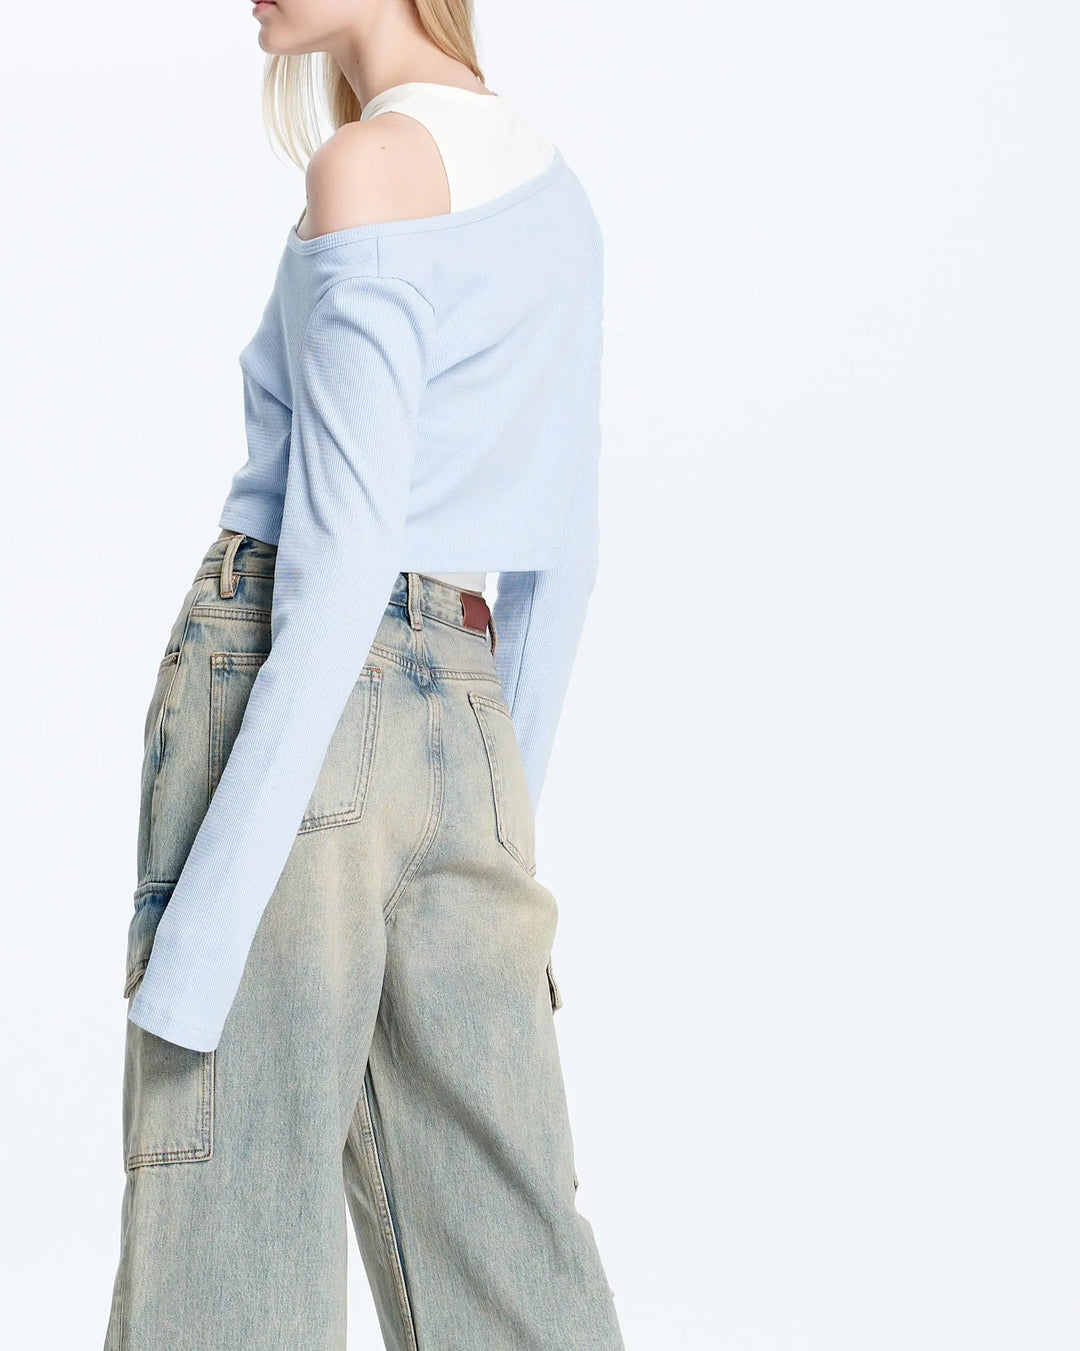 An image of a   230215 Layered Top by  Mirra Masa